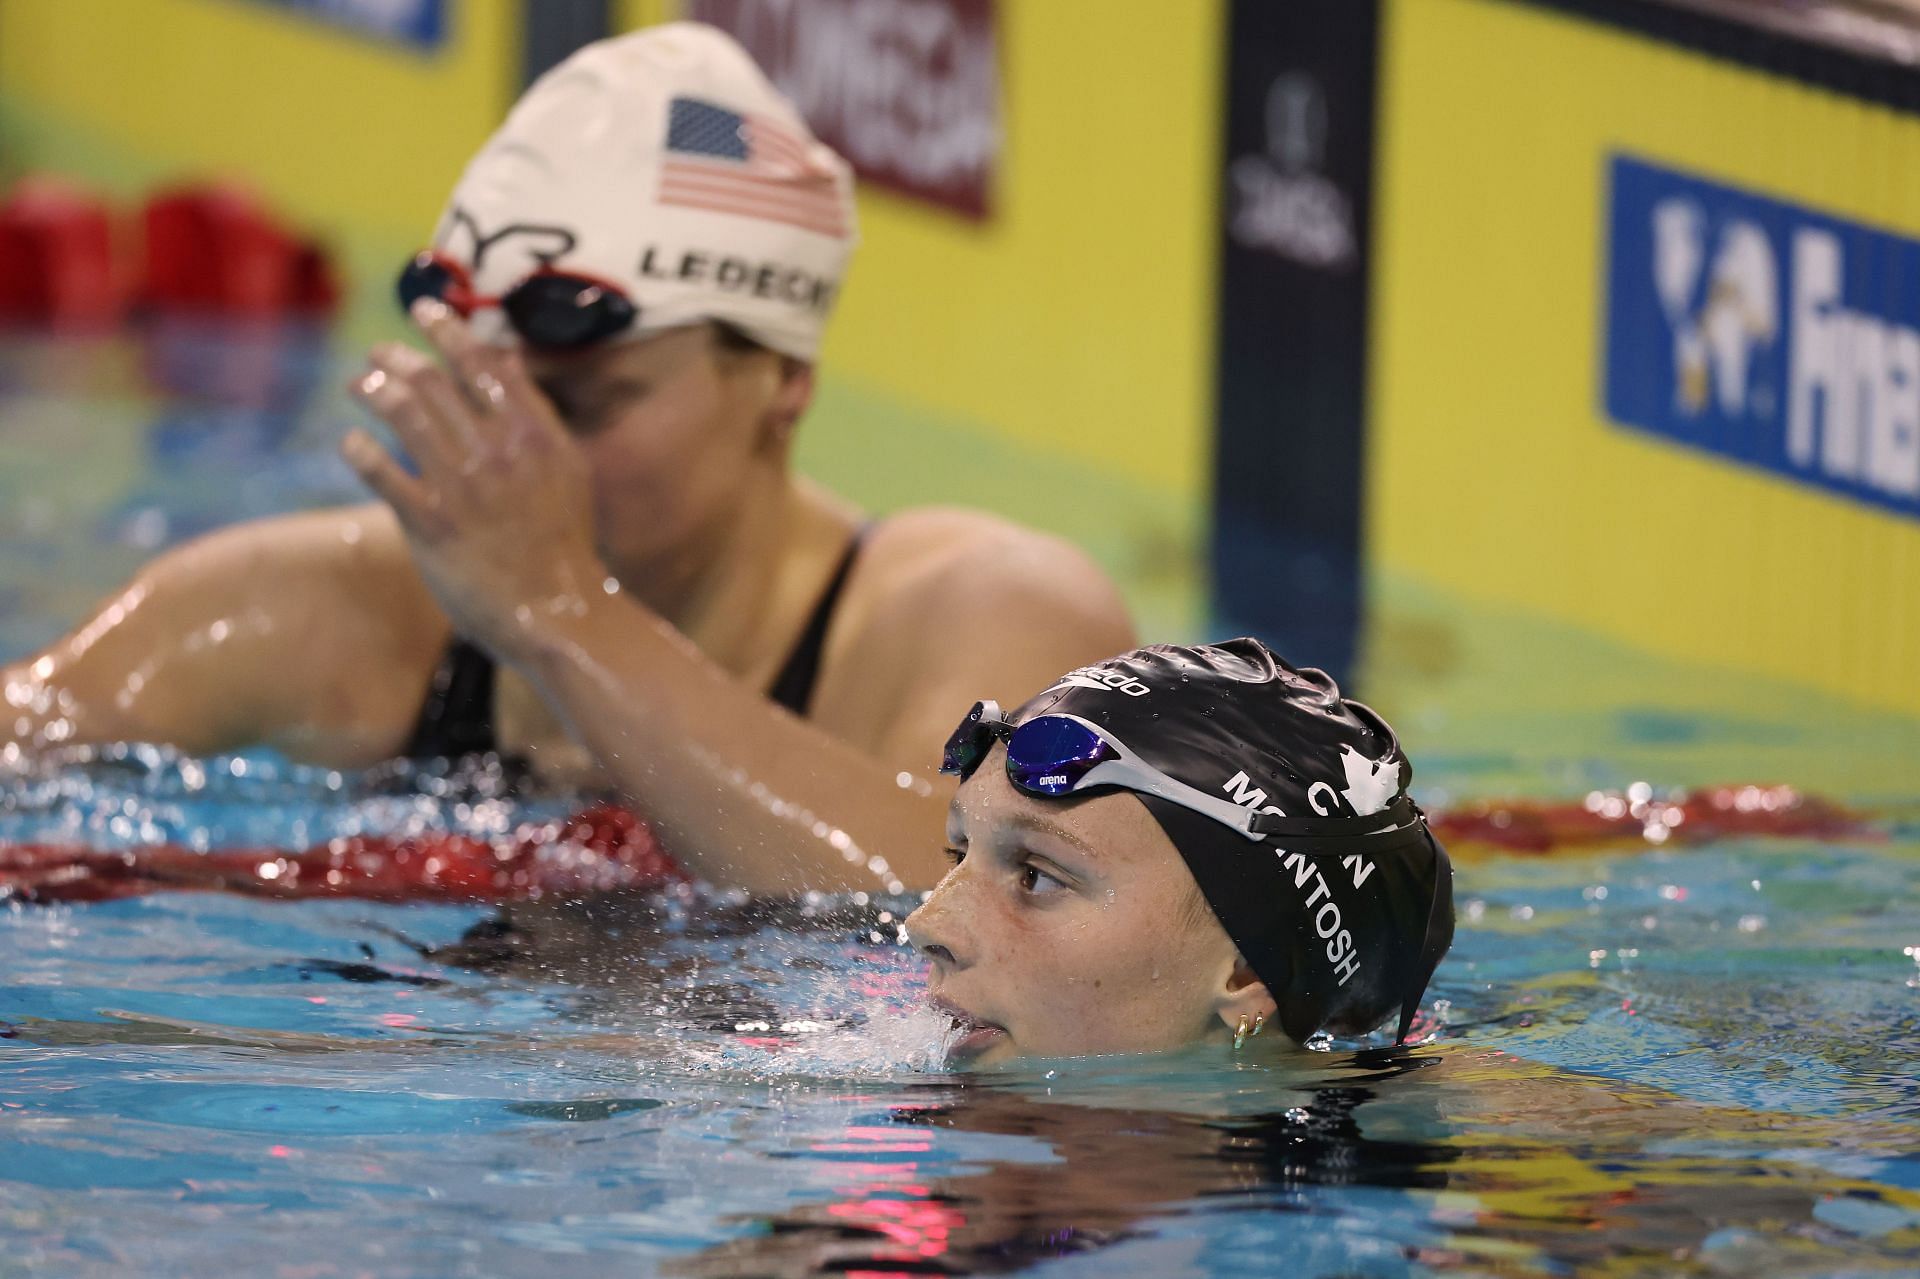 On October 28, 2022, in Toronto, Ontario, on the first day of the FINA Swimming World Cup, Summer McIntosh of Canada triumphed in the Women&#039;s 400m Freestyle Final before Katie Ledecky of the United States.